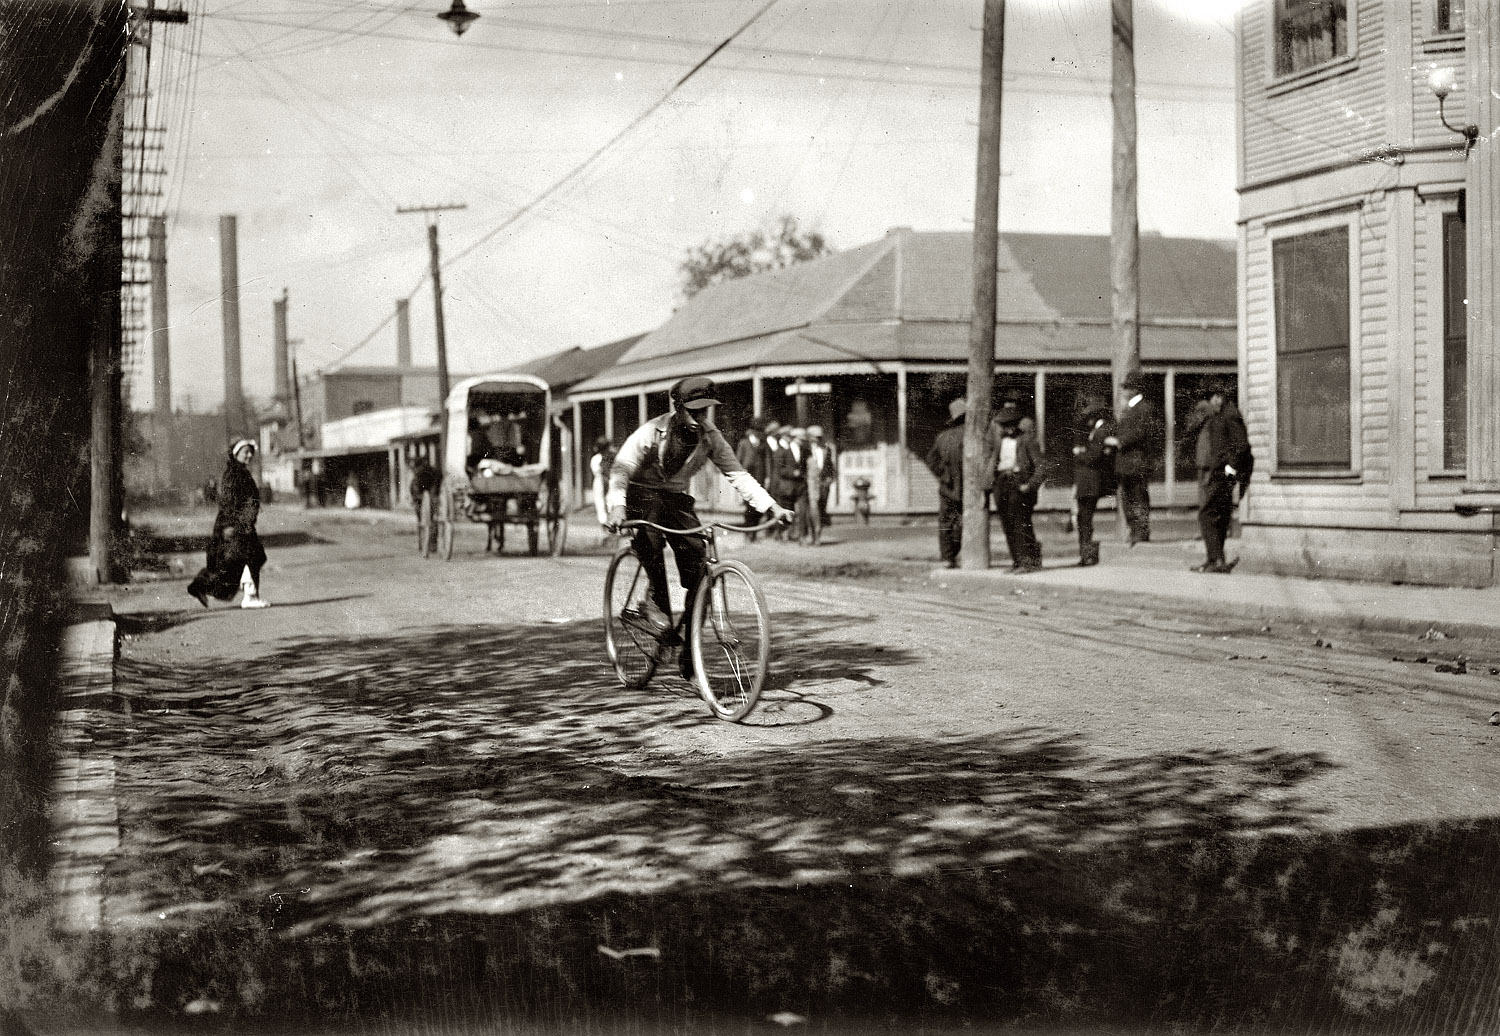 Dallas, October 1913. "Messenger boy in the heart of the Reservation (Red Light). Prostitutes run back and forth. Business beginning at mid-day. I saw messenger boys and delivery boys for drug stores from 15 years upward. Some still younger told me that they go there. This was in spite of a strong agitation being waged to close up the resorts." Photo and caption by Lewis Wickes Hine. View full size.